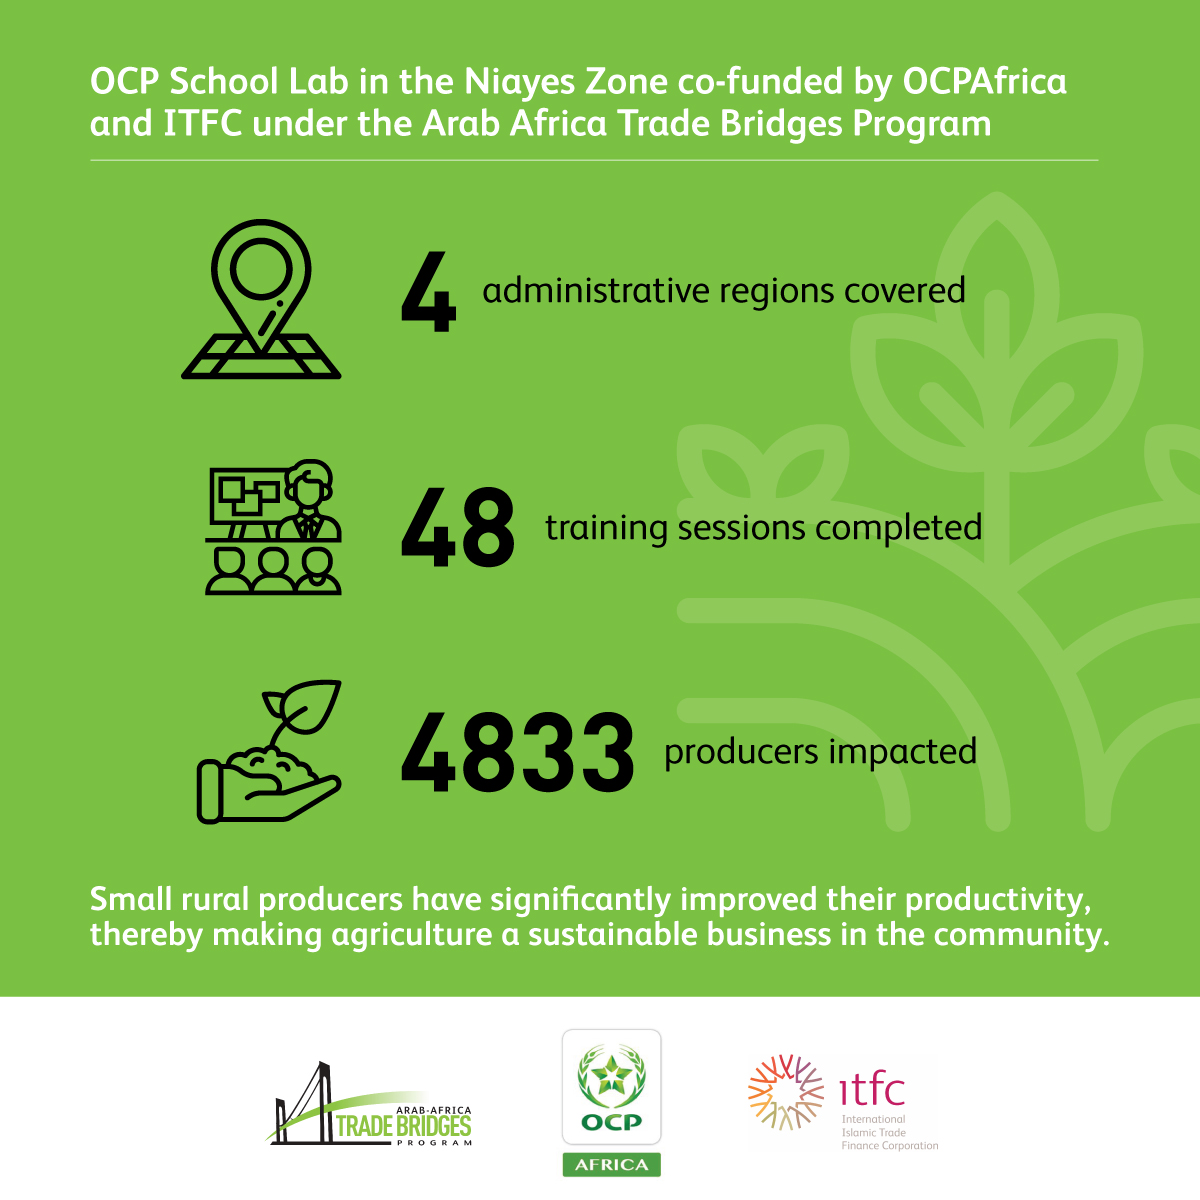 The OCP School Lab in the Niayes Zone, #Senegal co-funded by @OCP_Africa and ITFC (under the @aatb_program) was a first in terms of innovation and opportunities provided to local producers. 
#ITFCImpact #OCPSchoolLab